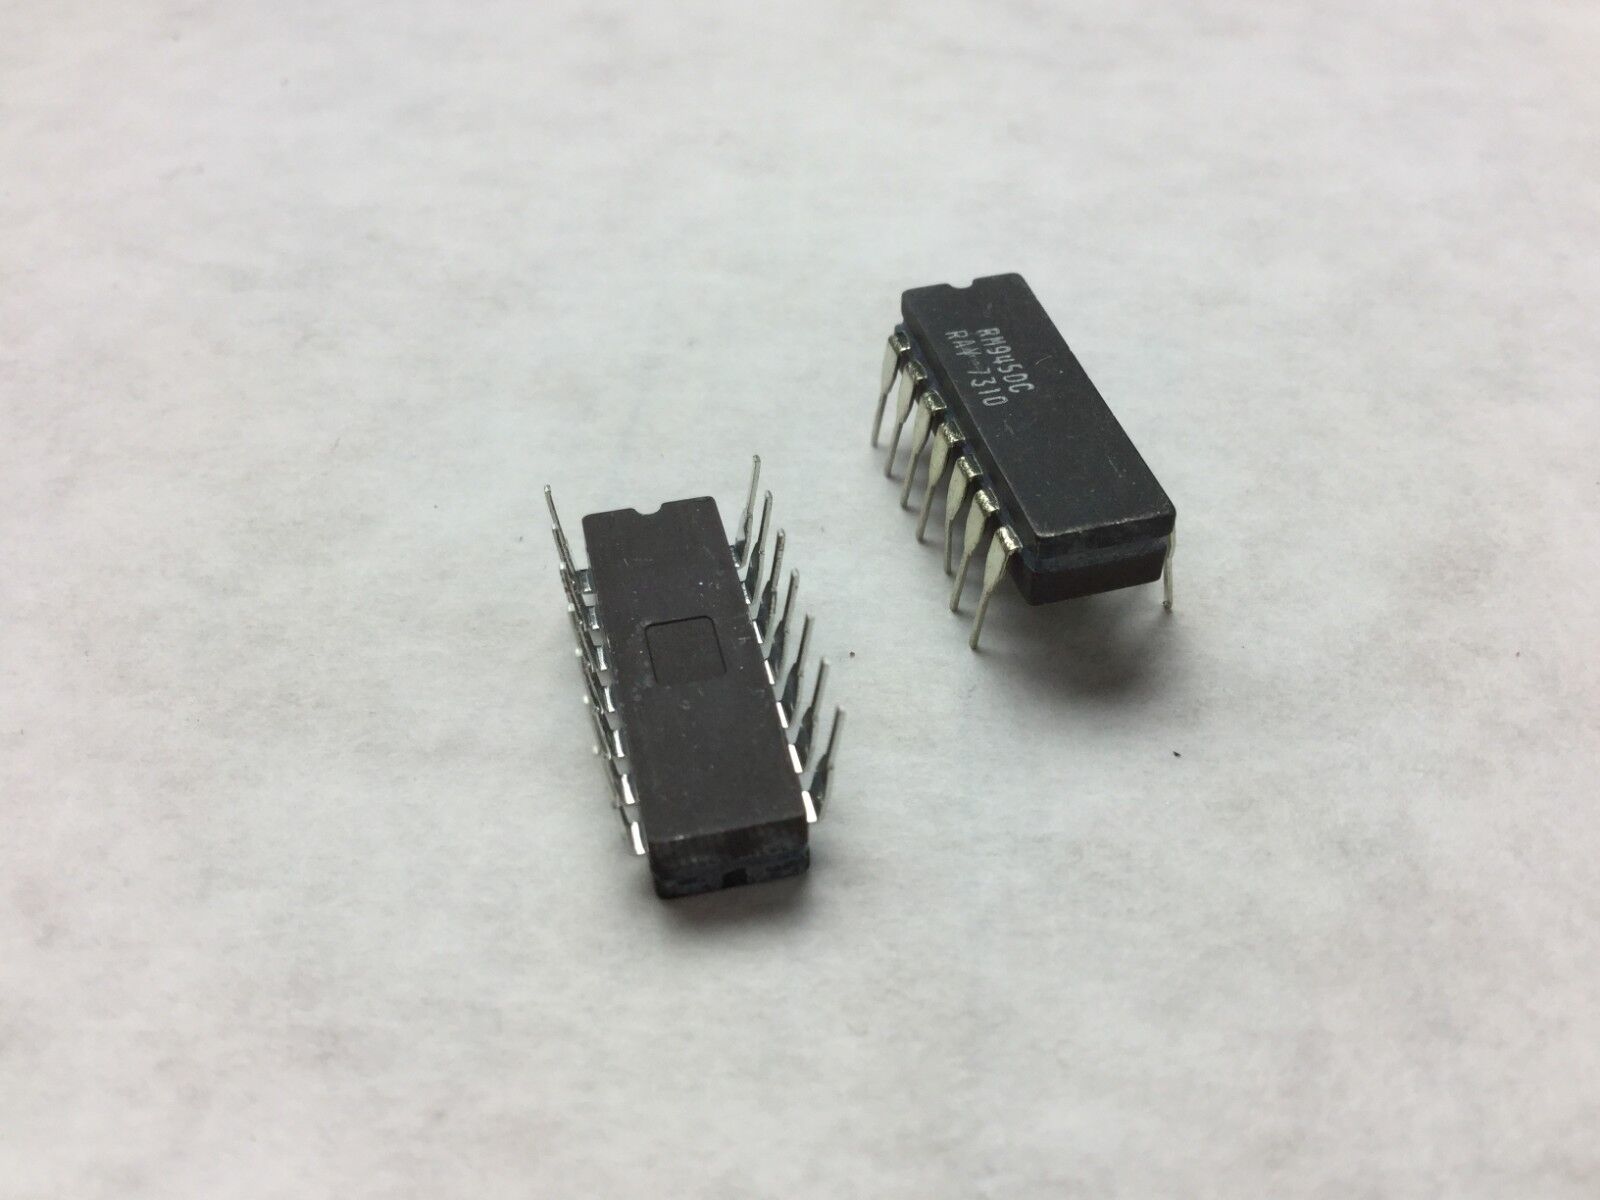 RM945DC Integrated Circuit Lot of 25